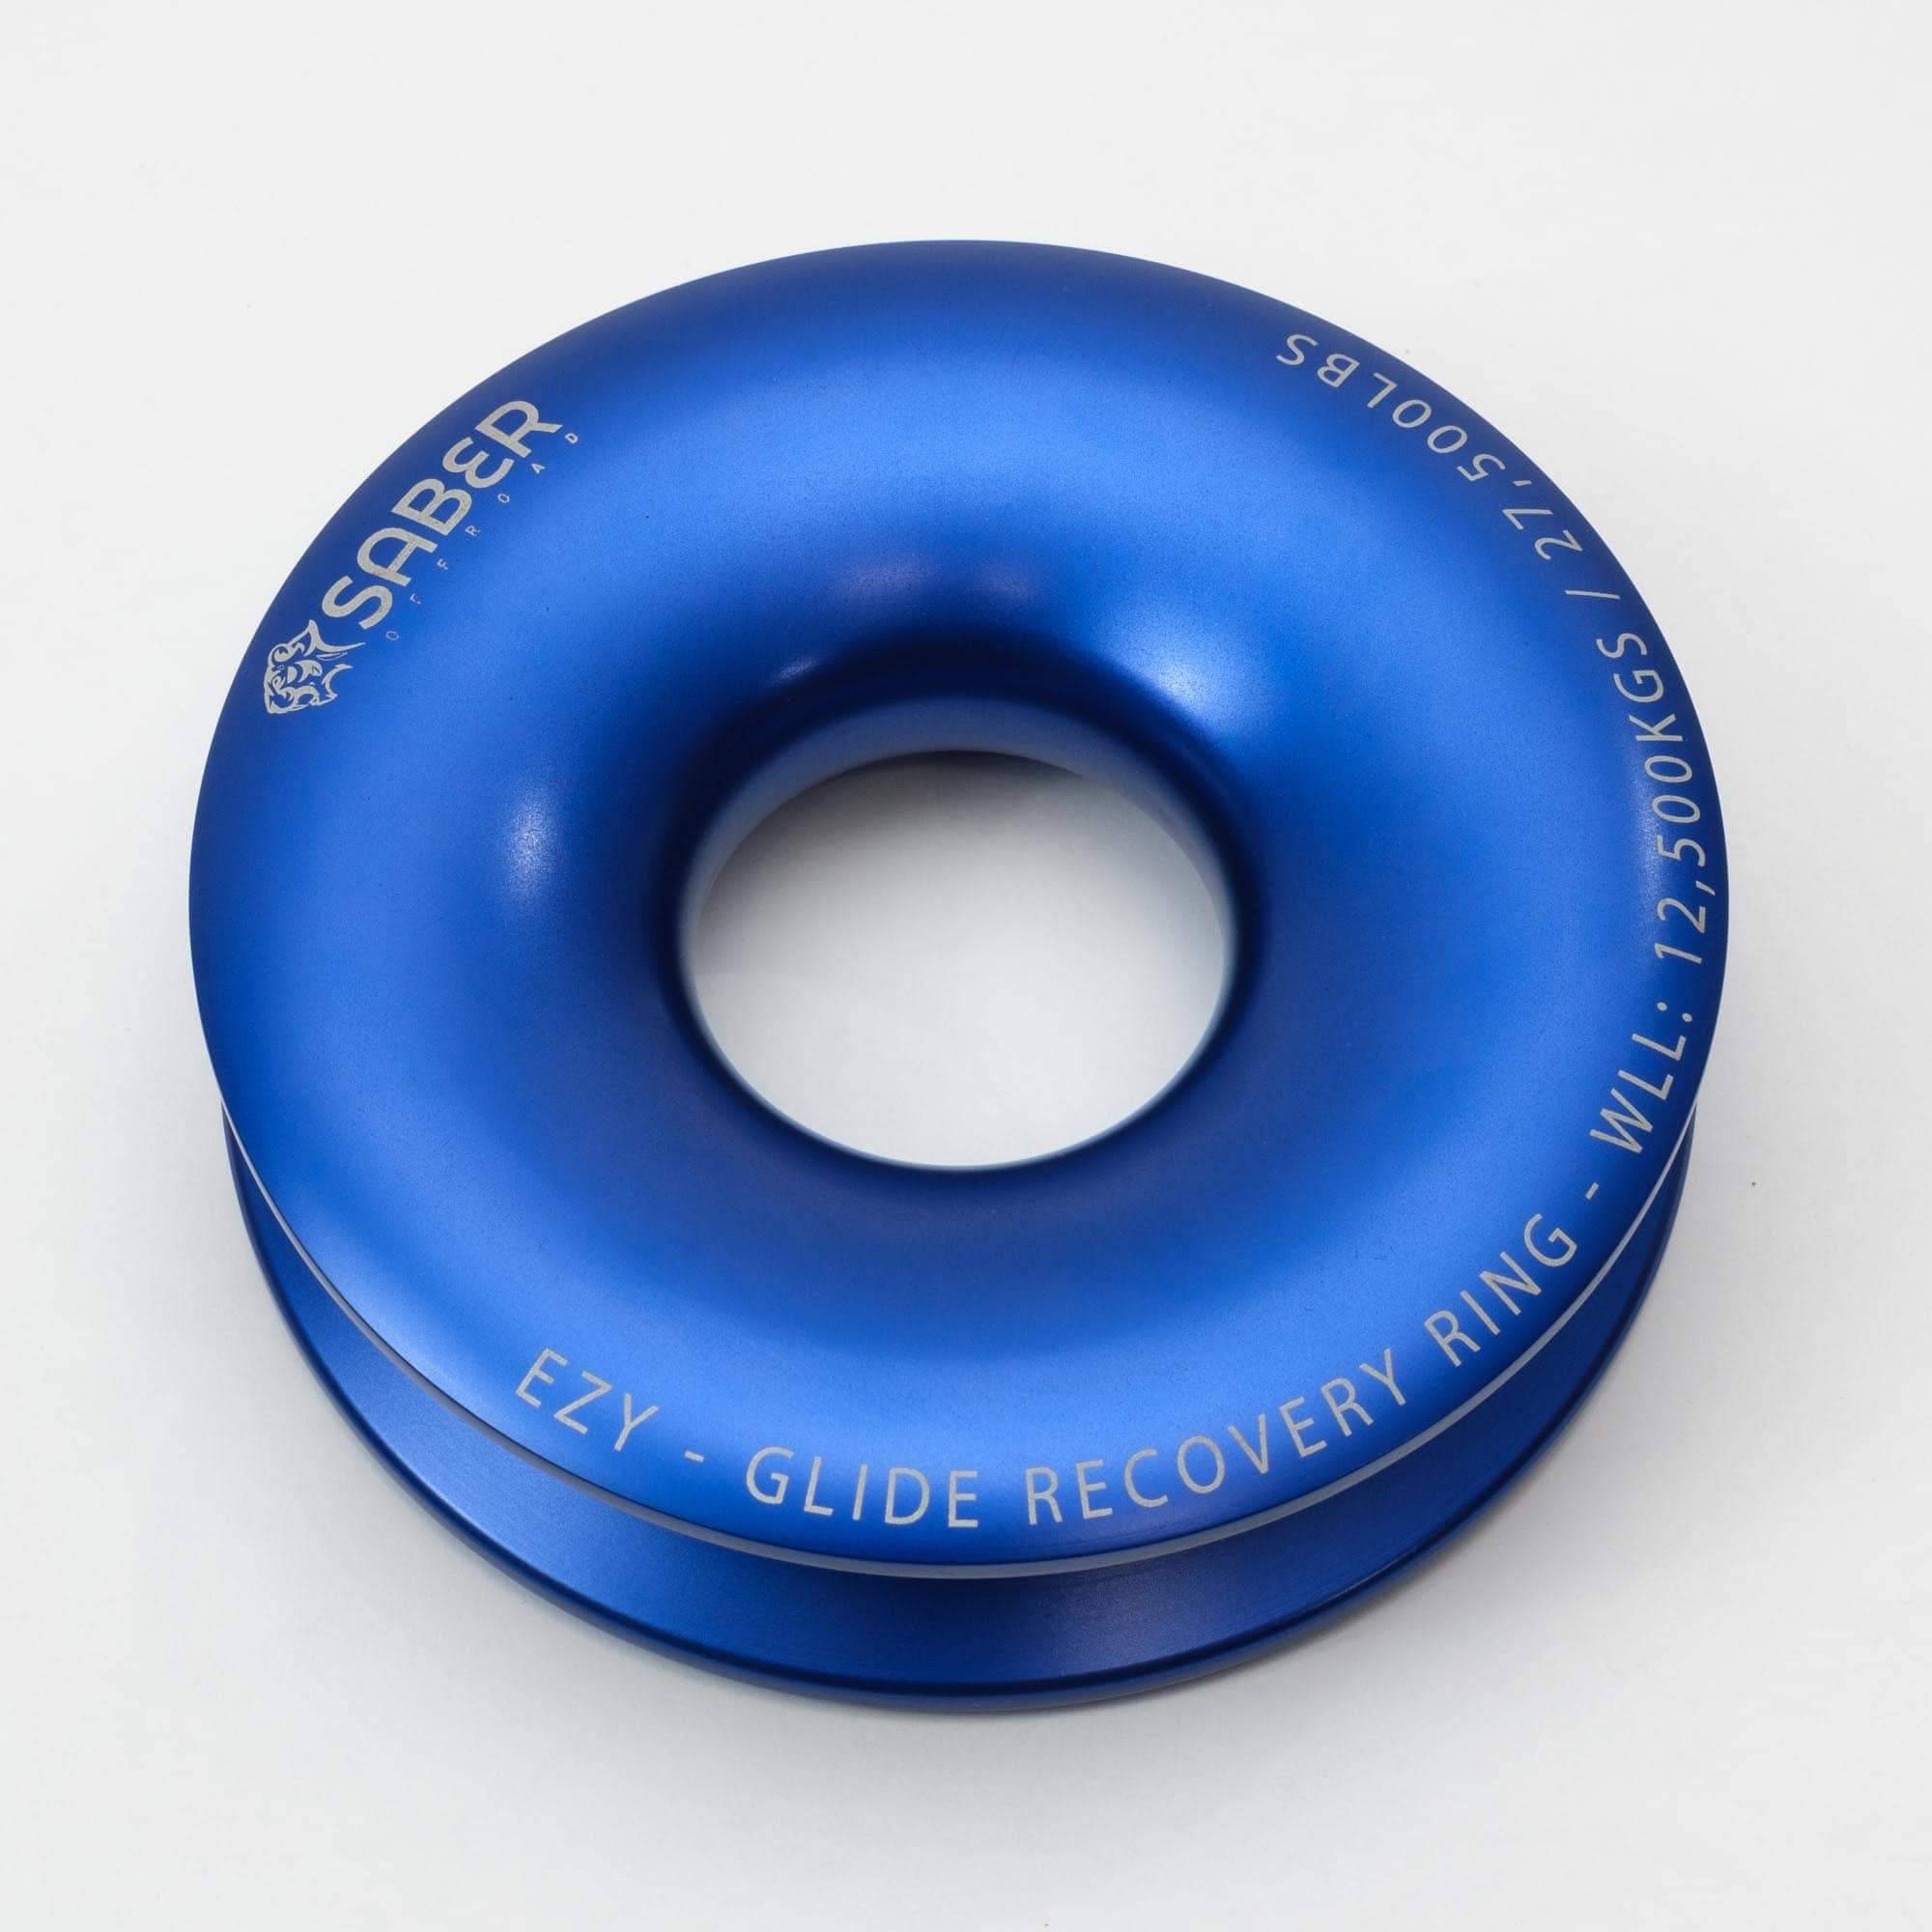 Saber Offroad Ezy-Glide Recovery Ring New + Twin 17K Bound Soft Shackle Kit | Saber Offroad